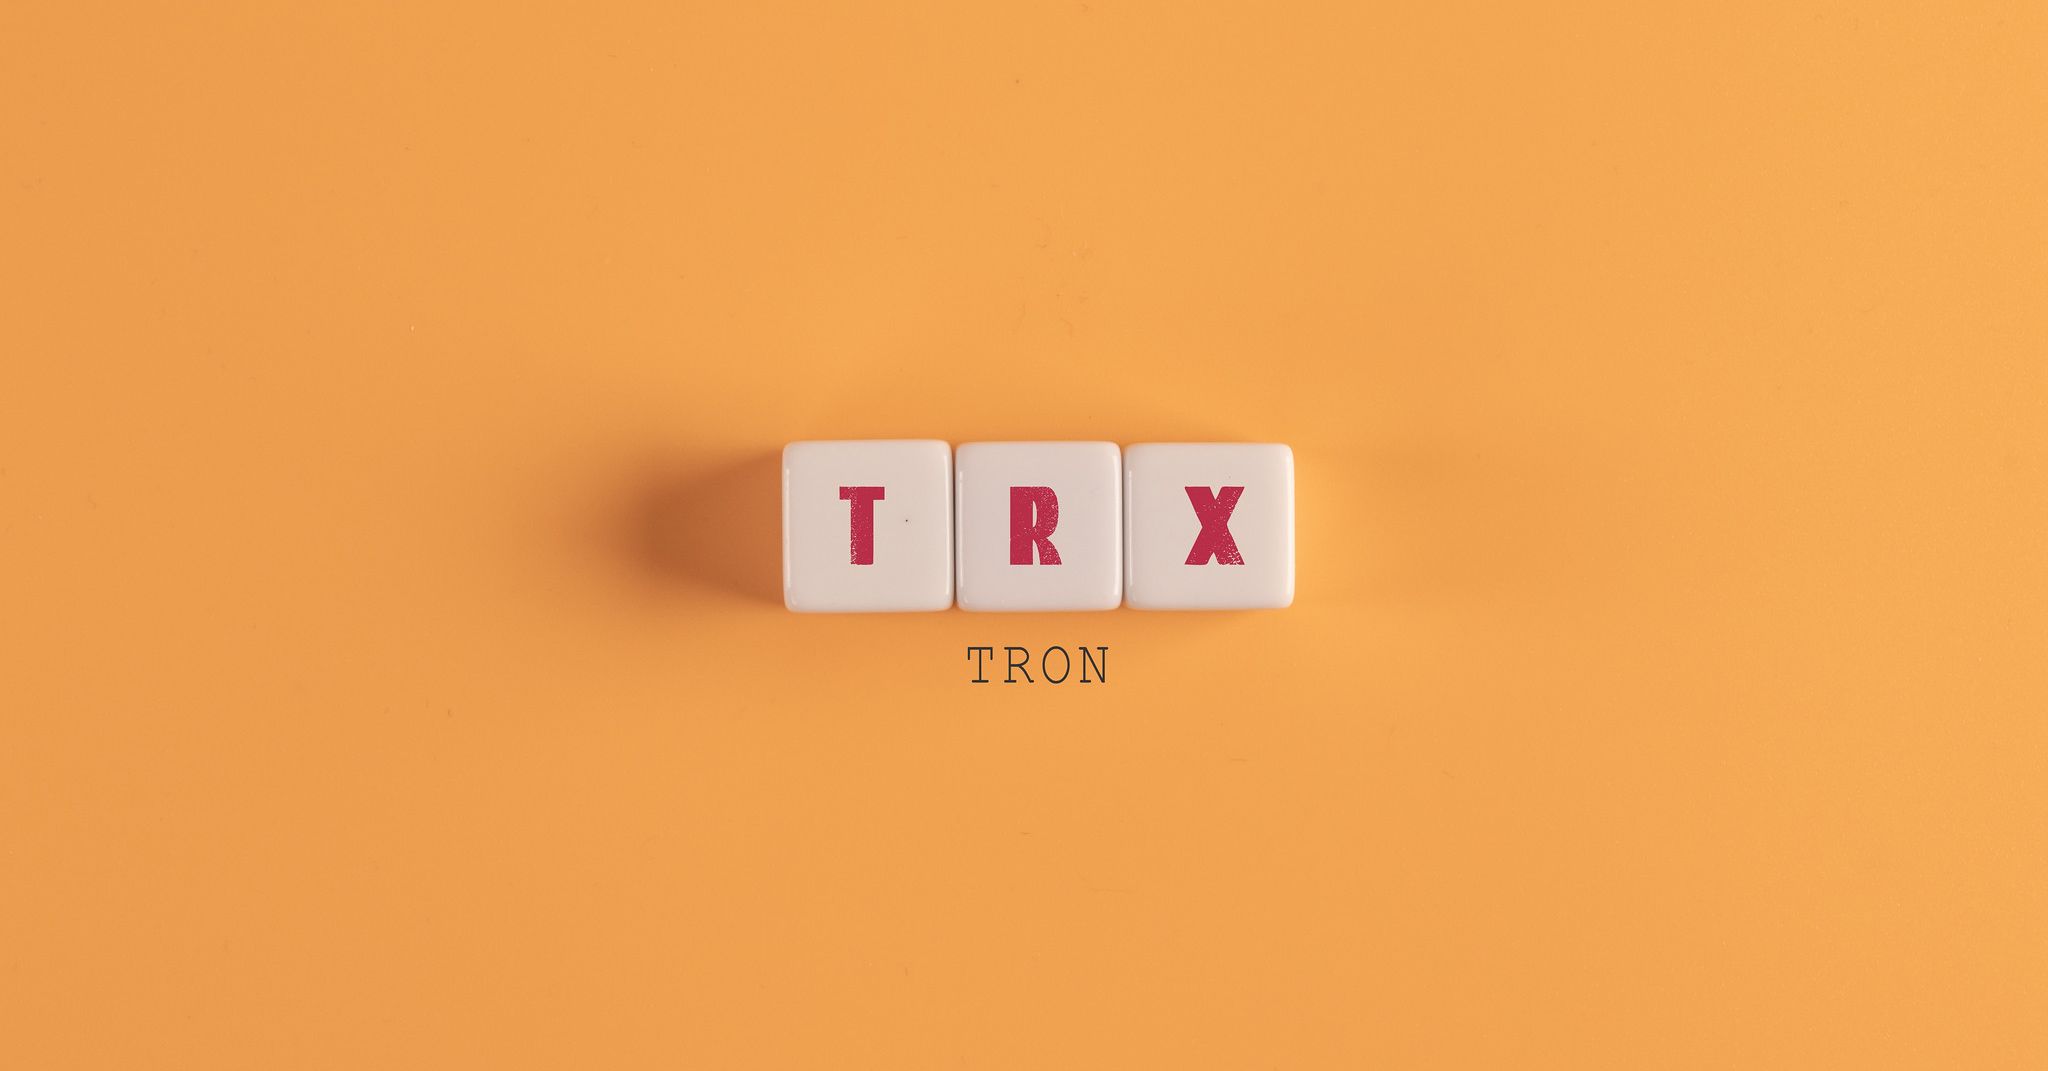 trx tron crypto spelled out in scrabble blocks